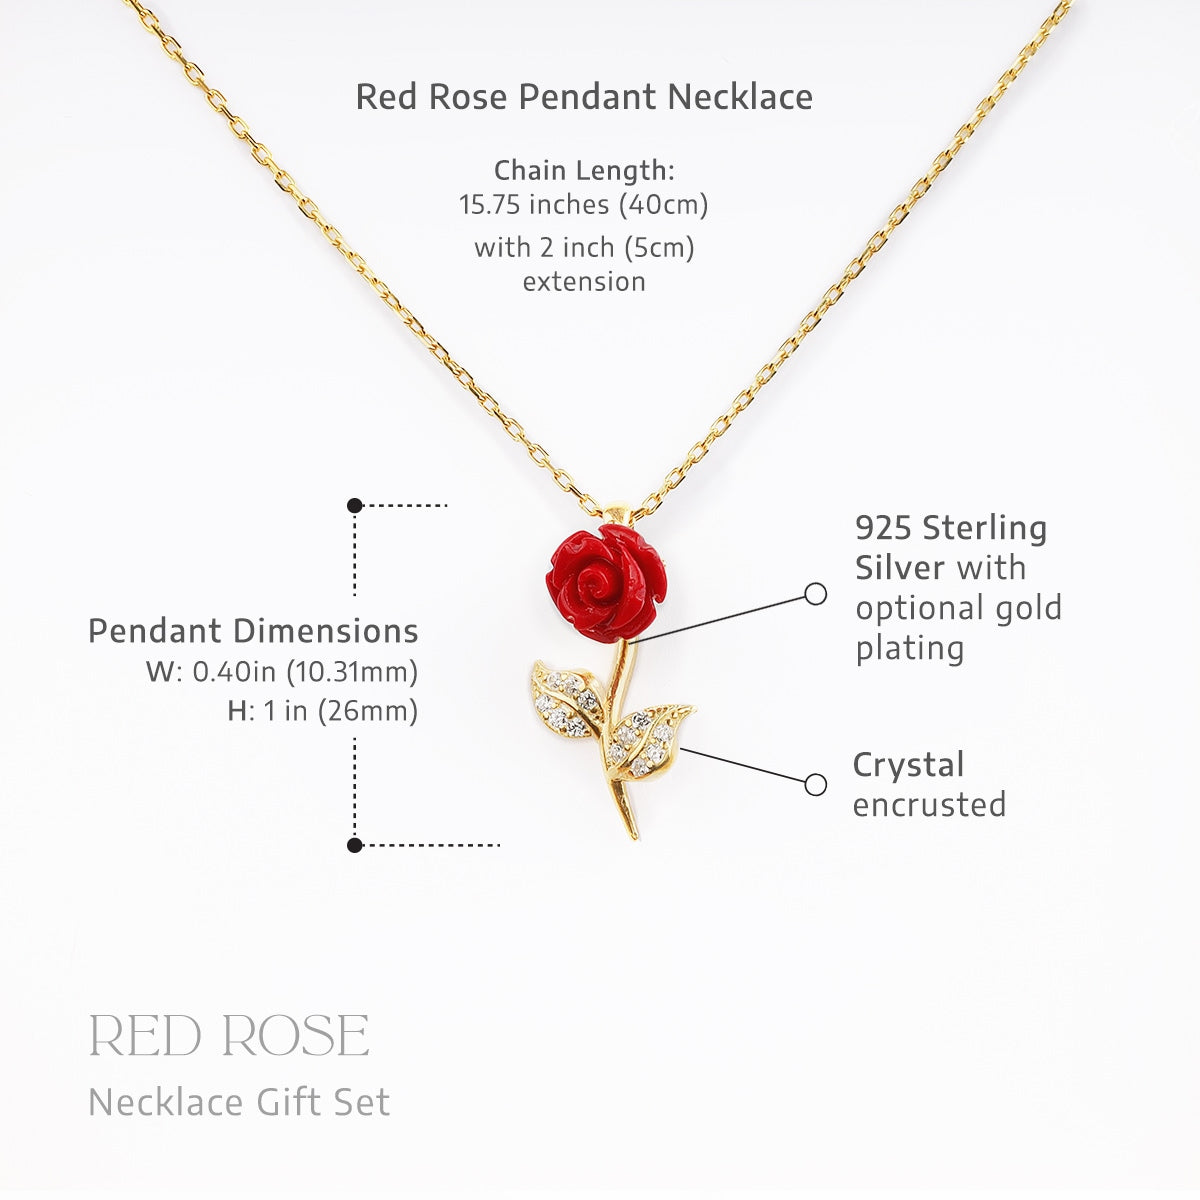 Enchantment Gift Box - To My Niece the Beauty - Red Rose Necklace Gift Set